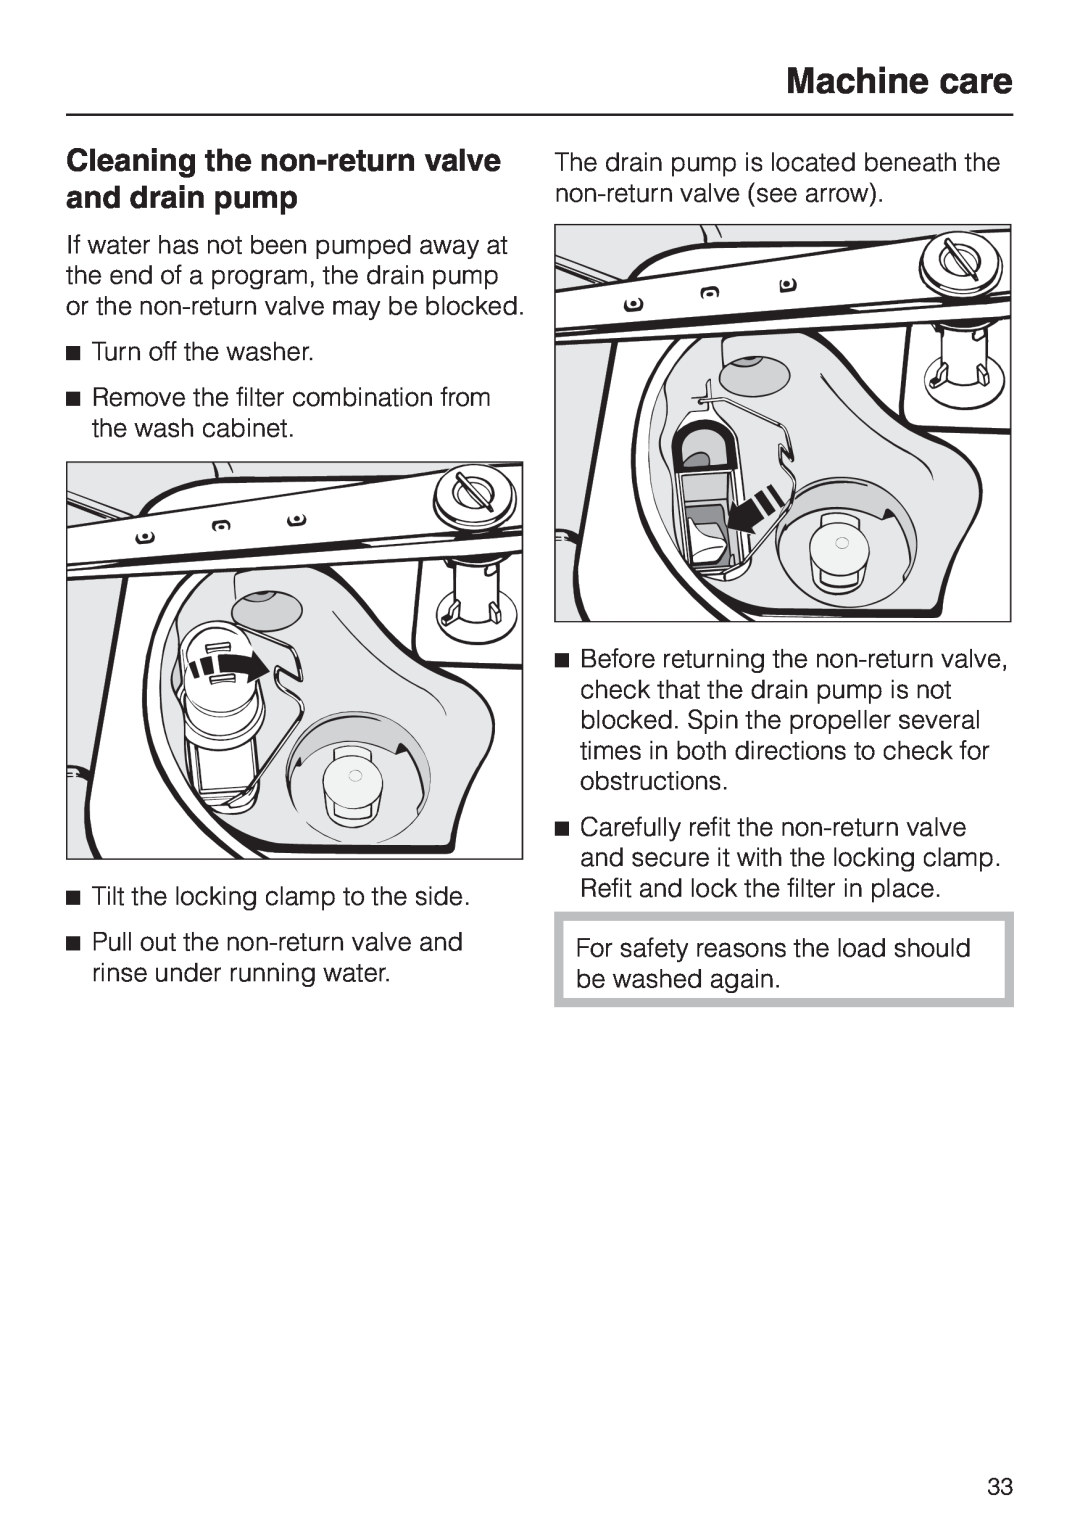 Miele G 7804 operating instructions Cleaning the non-returnvalve and drain pump, Machine care 